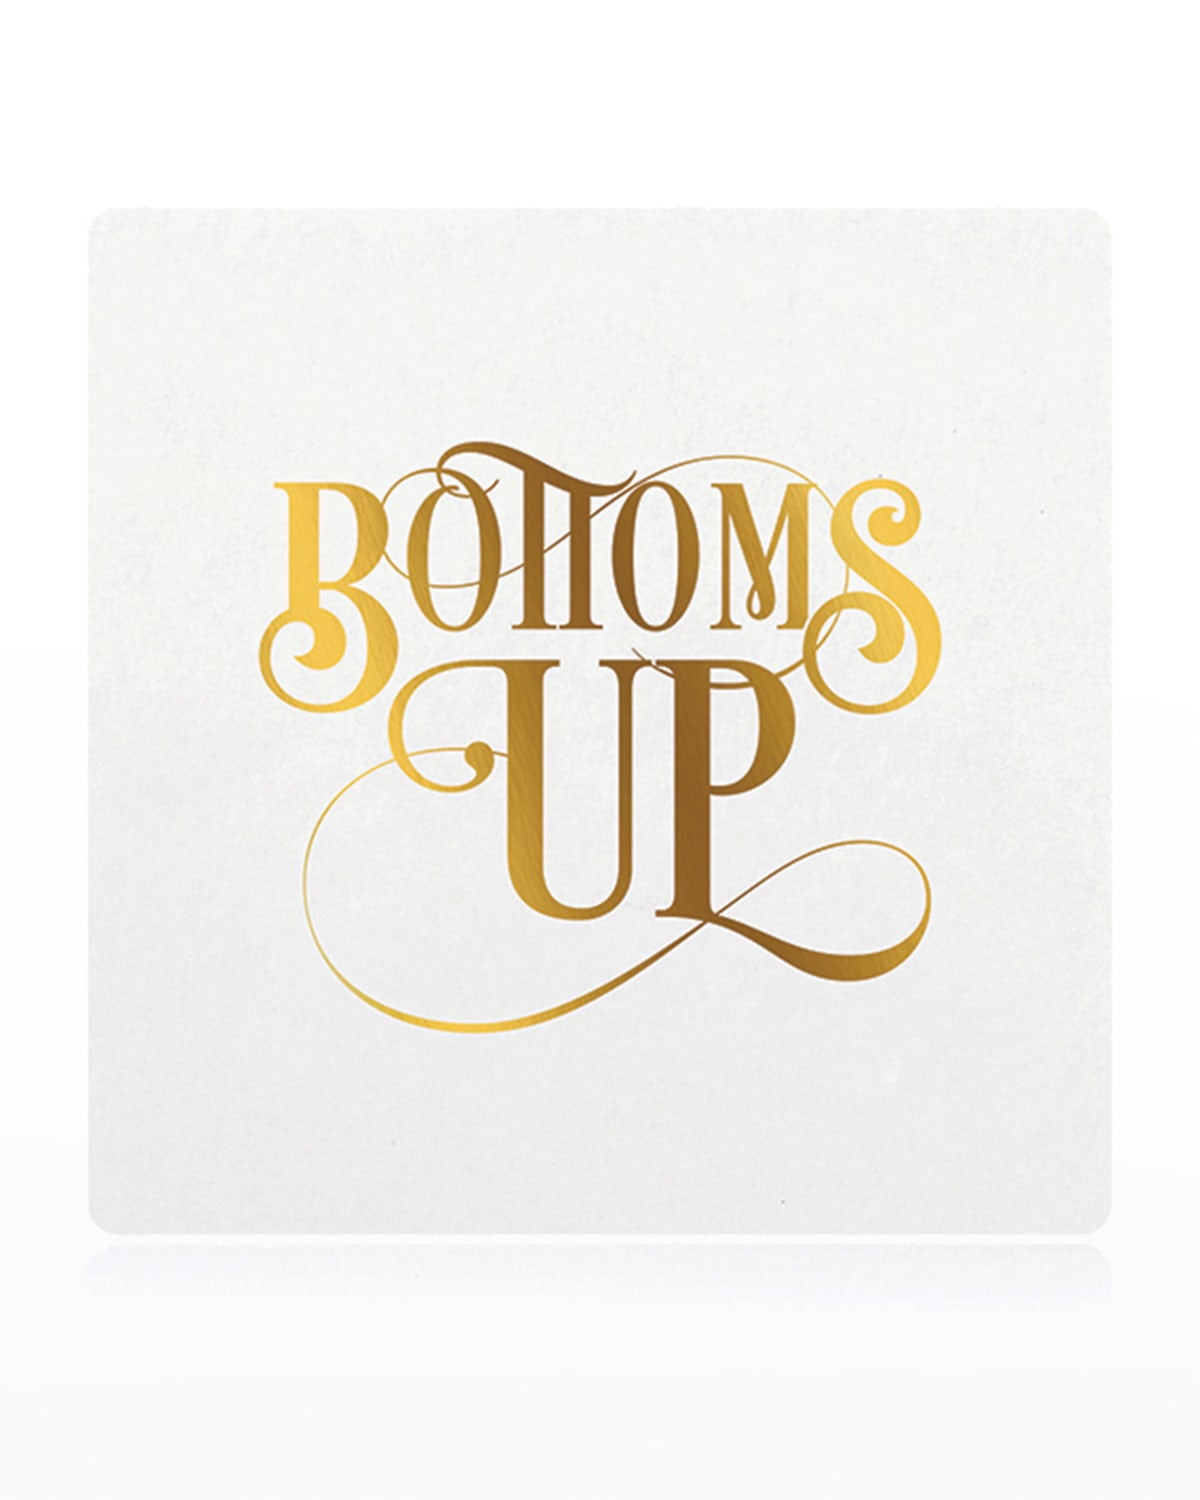 BELL'INVITO BOTTOMS UP COASTERS - SET OF 18,PROD235180381